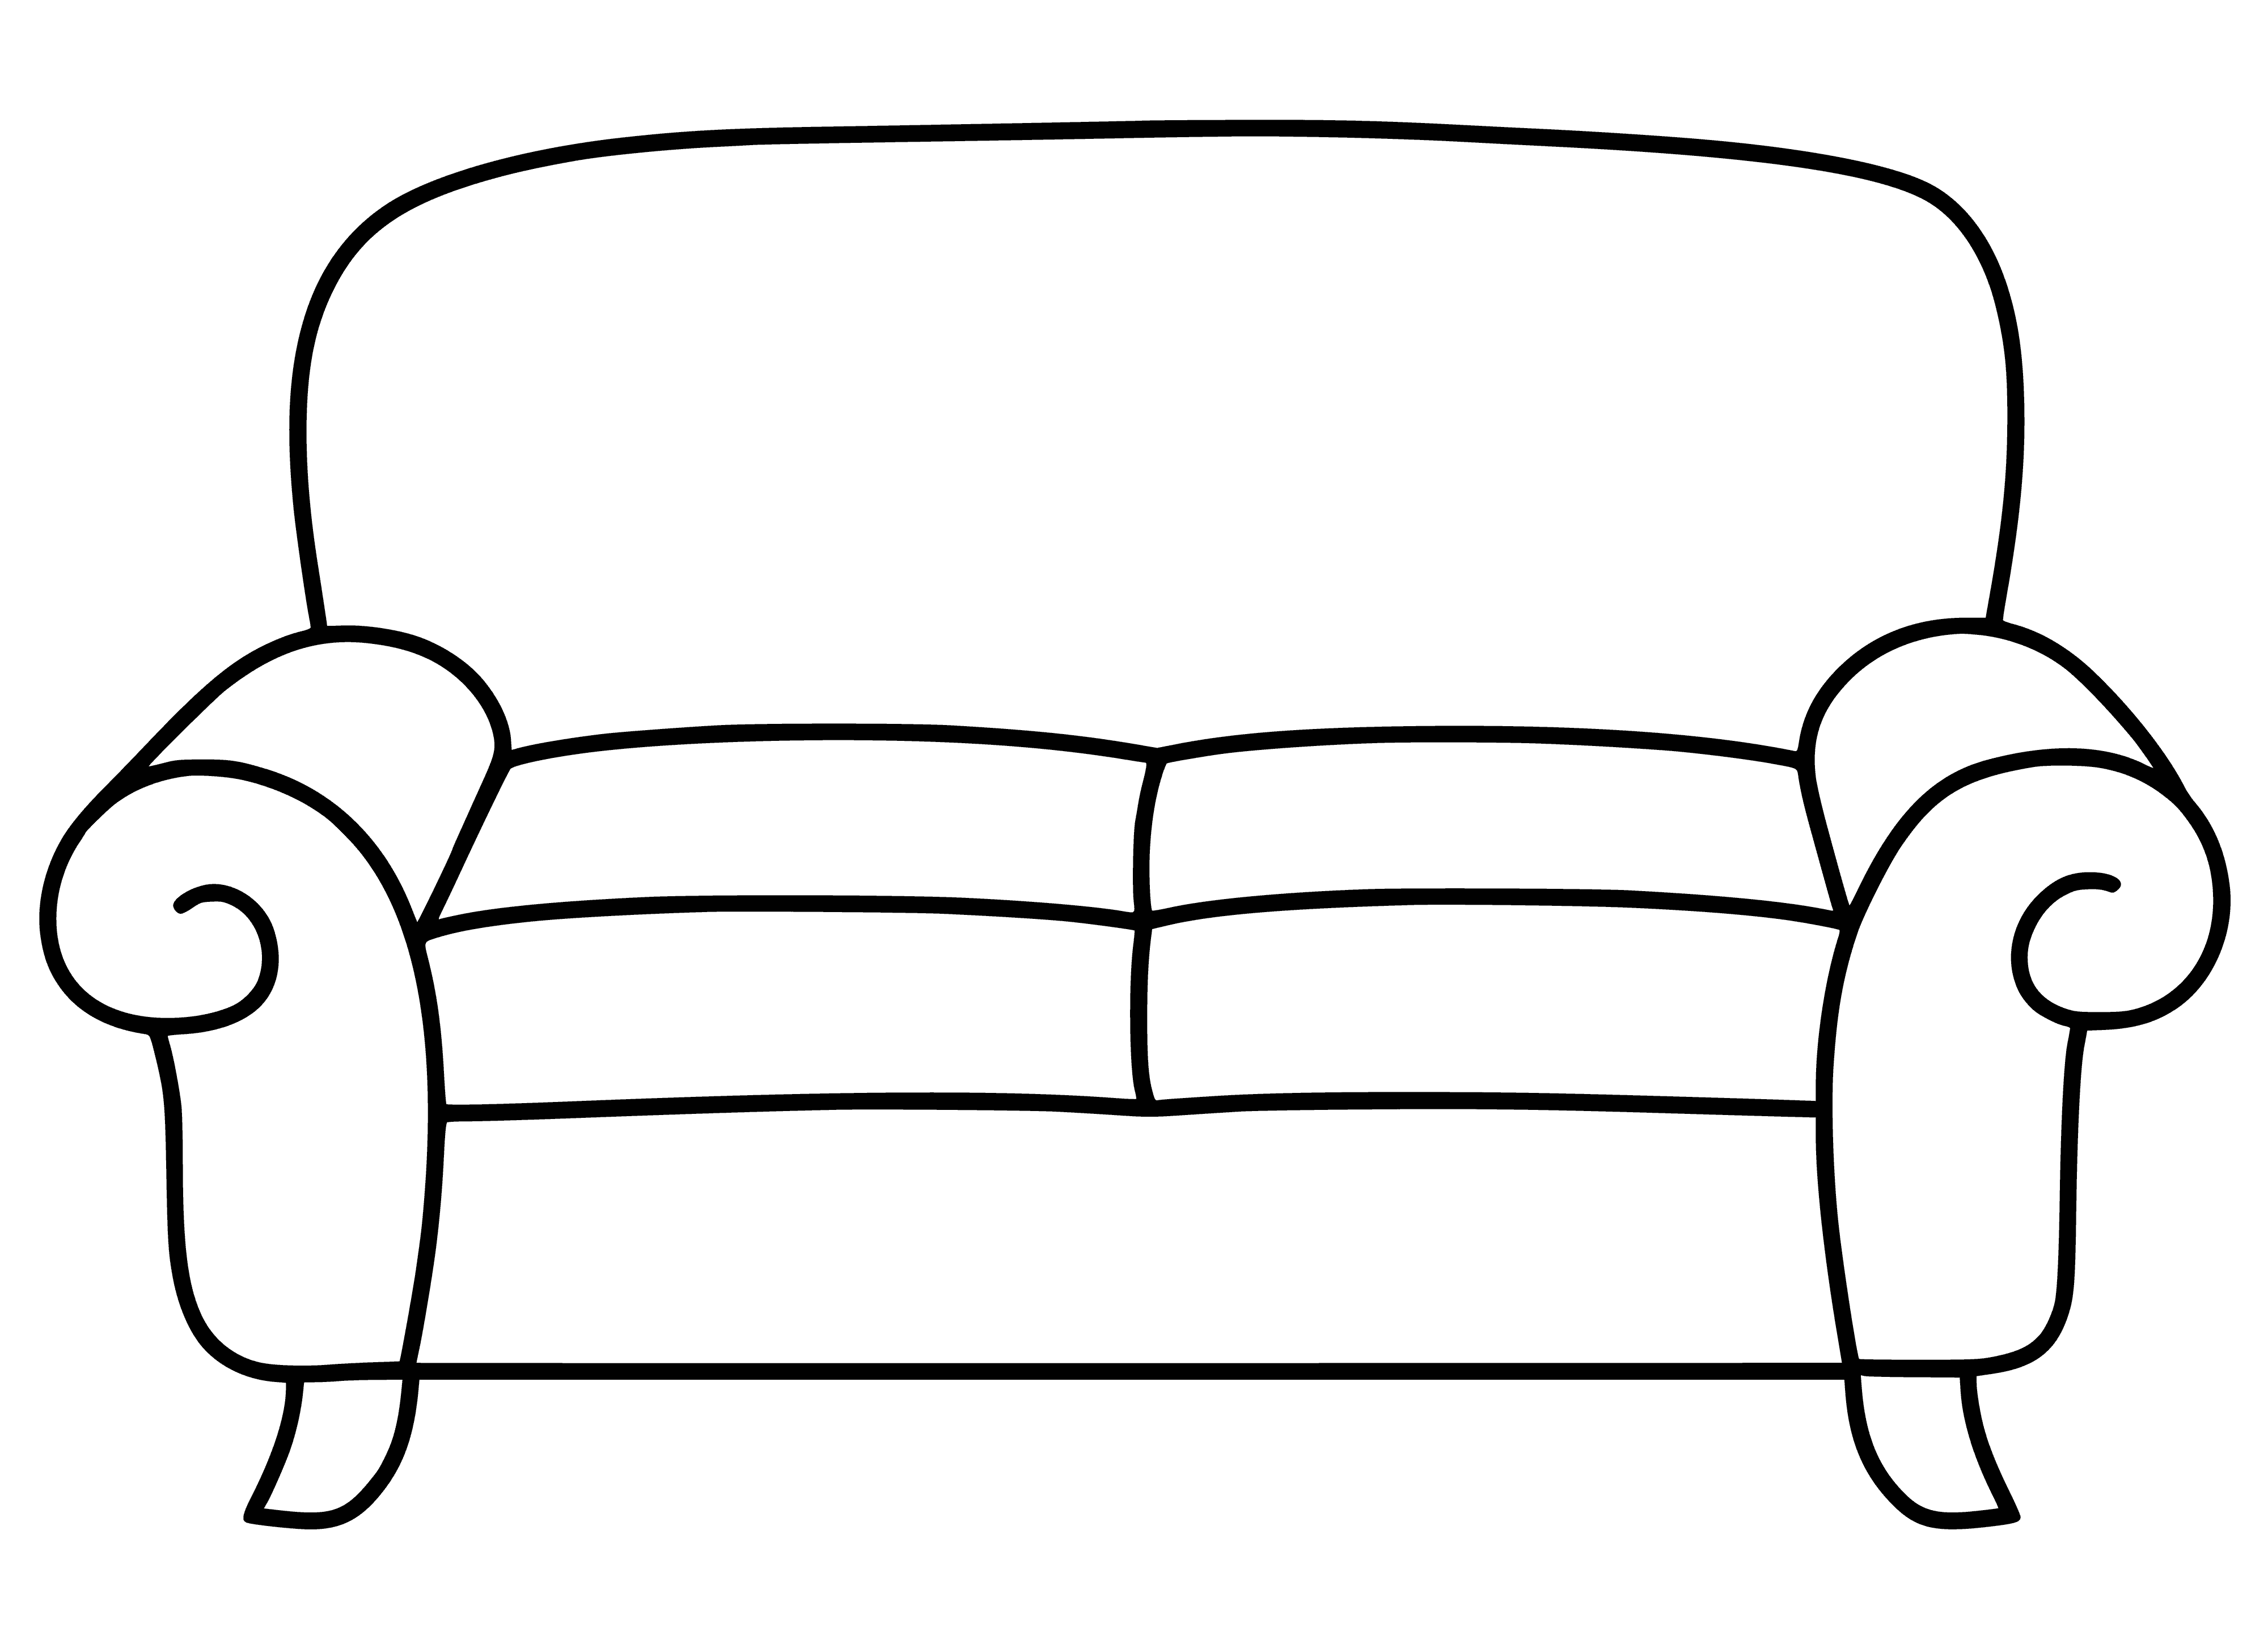 coloring page: Coloring page of a sofa w/wood frame, 6 legs, and patterned fabric & 3 cushions. #adults #kids #art